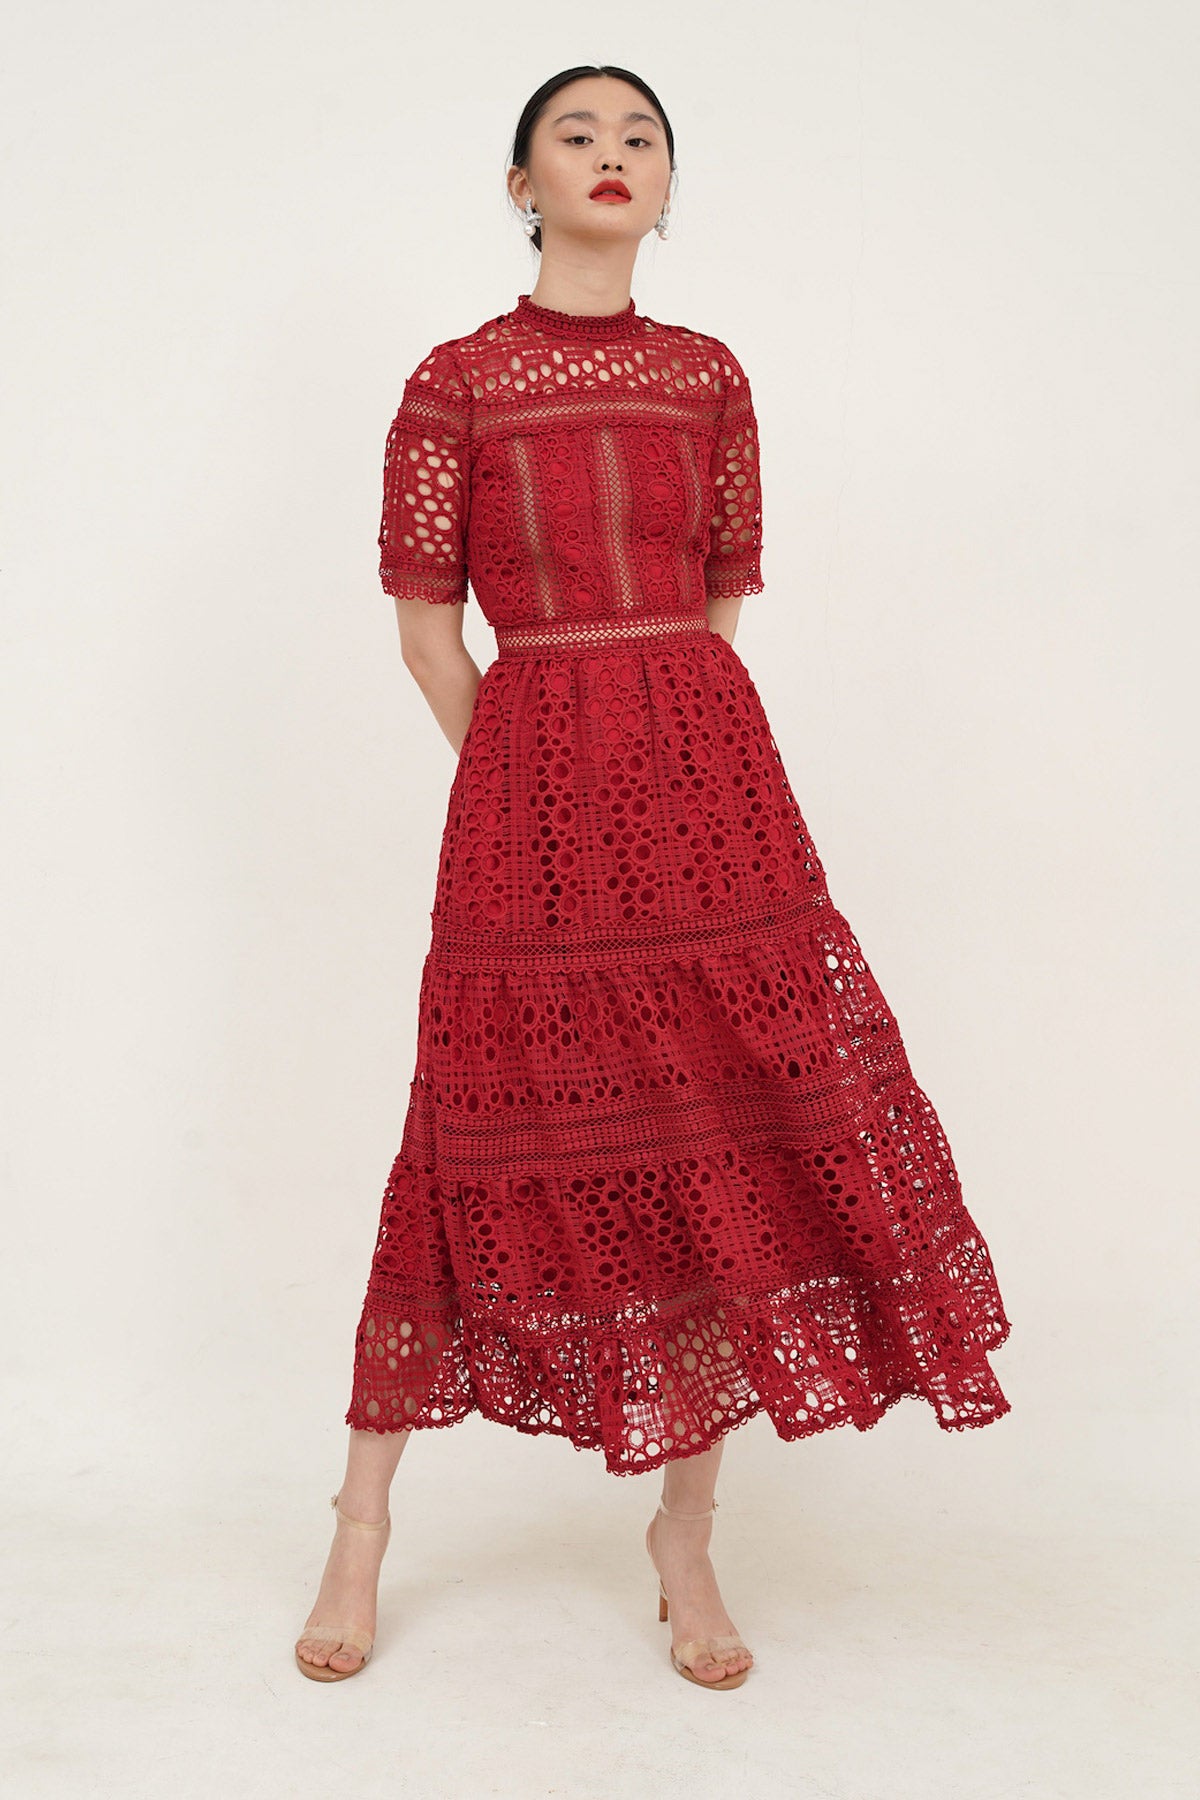 Guilin Dress In Red (2 Left)